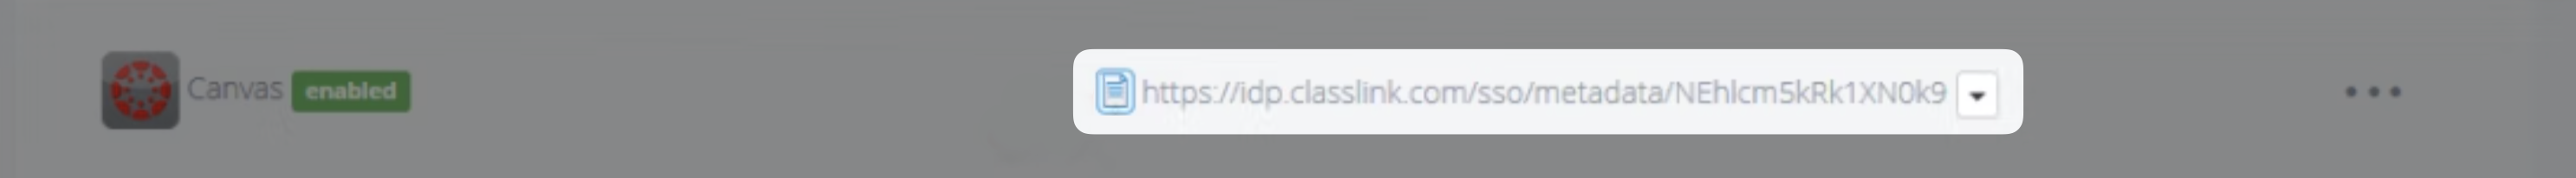 A screenshot highlighting where the Classlink Metadata URL is located in the ClassLink console.